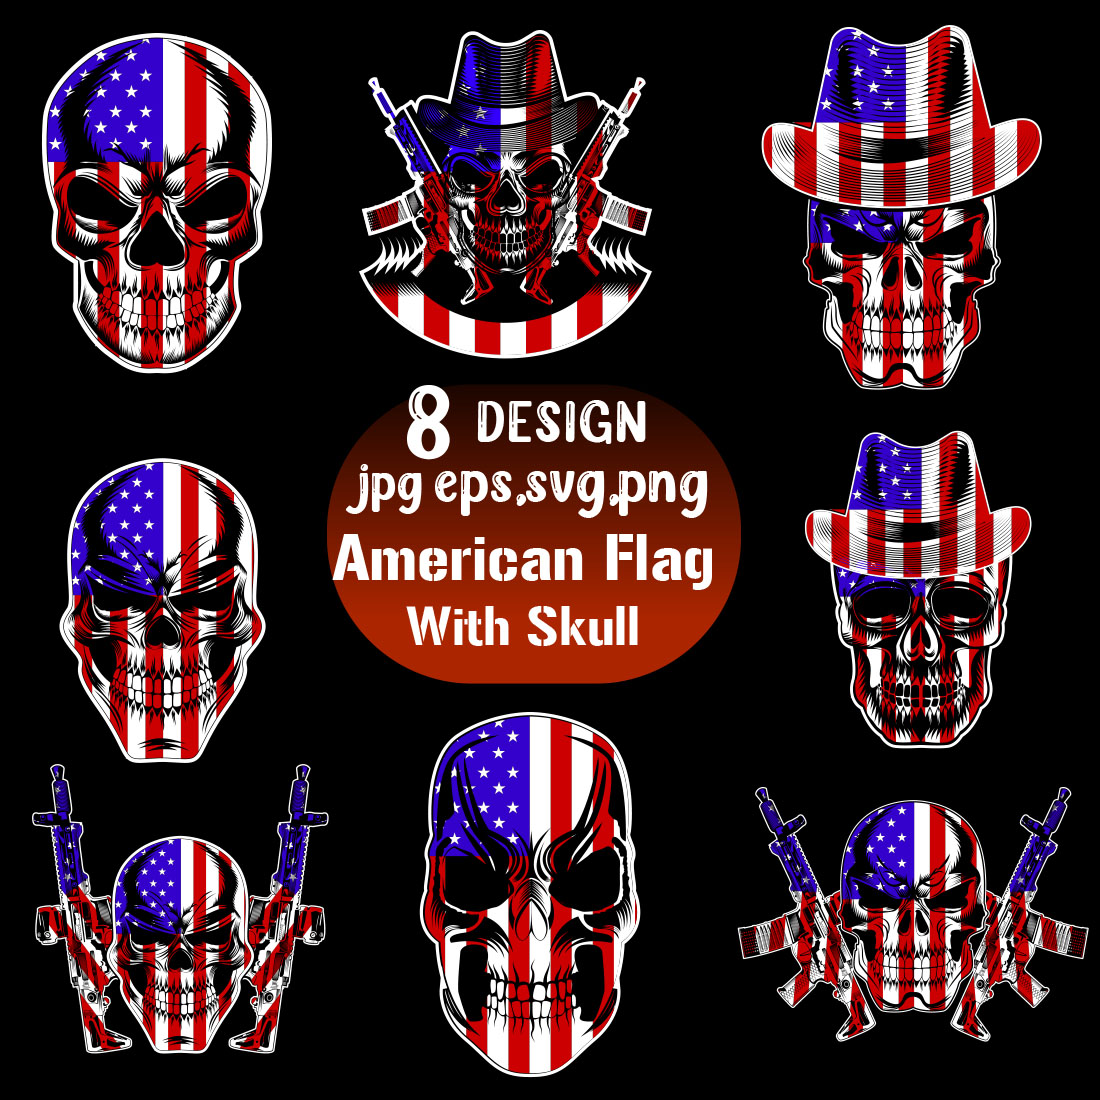 T-shirt American Flag with Skull Design cover image.